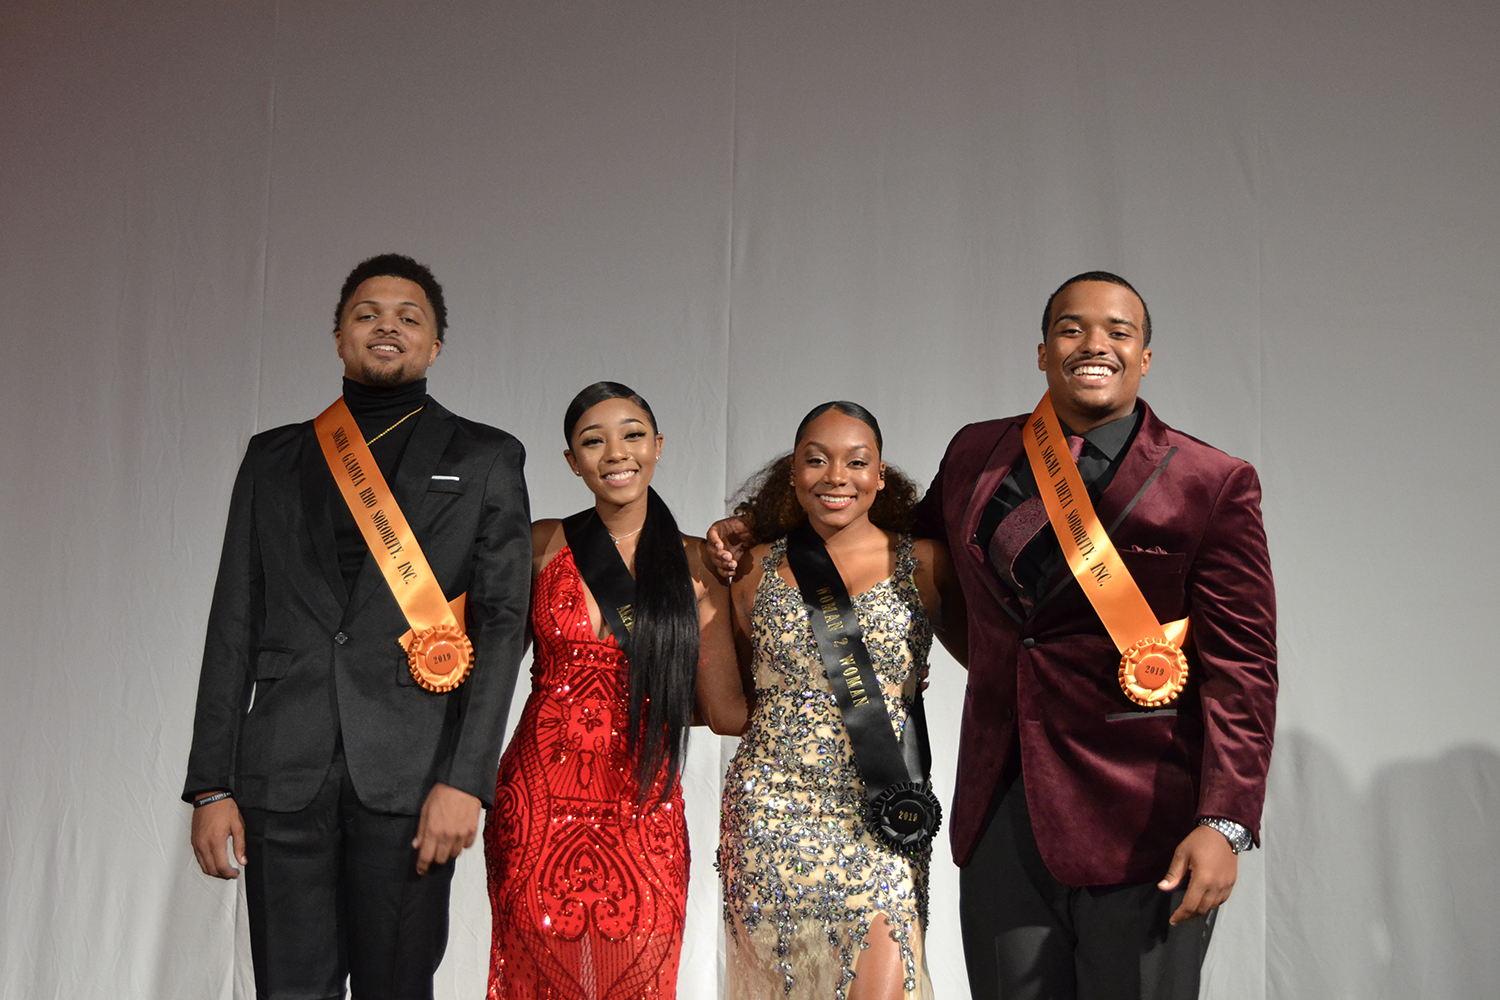 Pageant winners and runner ups 2019 (left to right): Dannie Wilks, Tori Tribble, Jonigh McGee, Bayione Rodgers